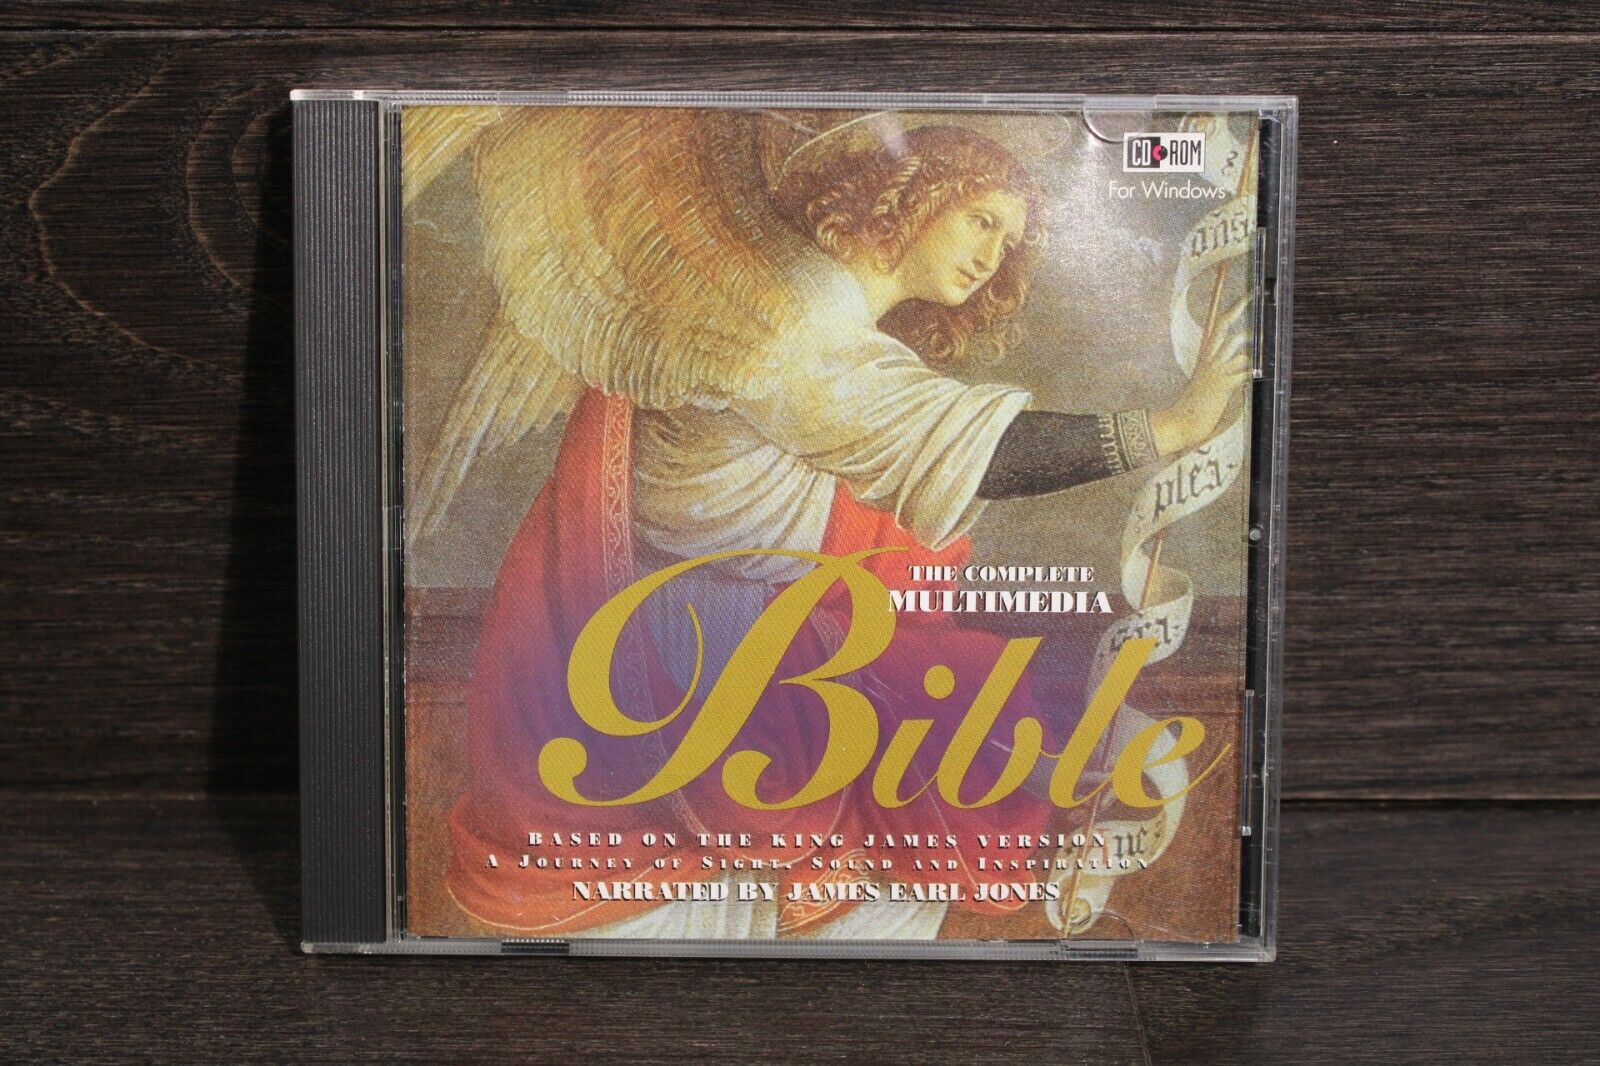 THE COMPLETE MULTIMEDIA BIBLE - Narrated by JAMES EARL JONES - CD ROM Windows